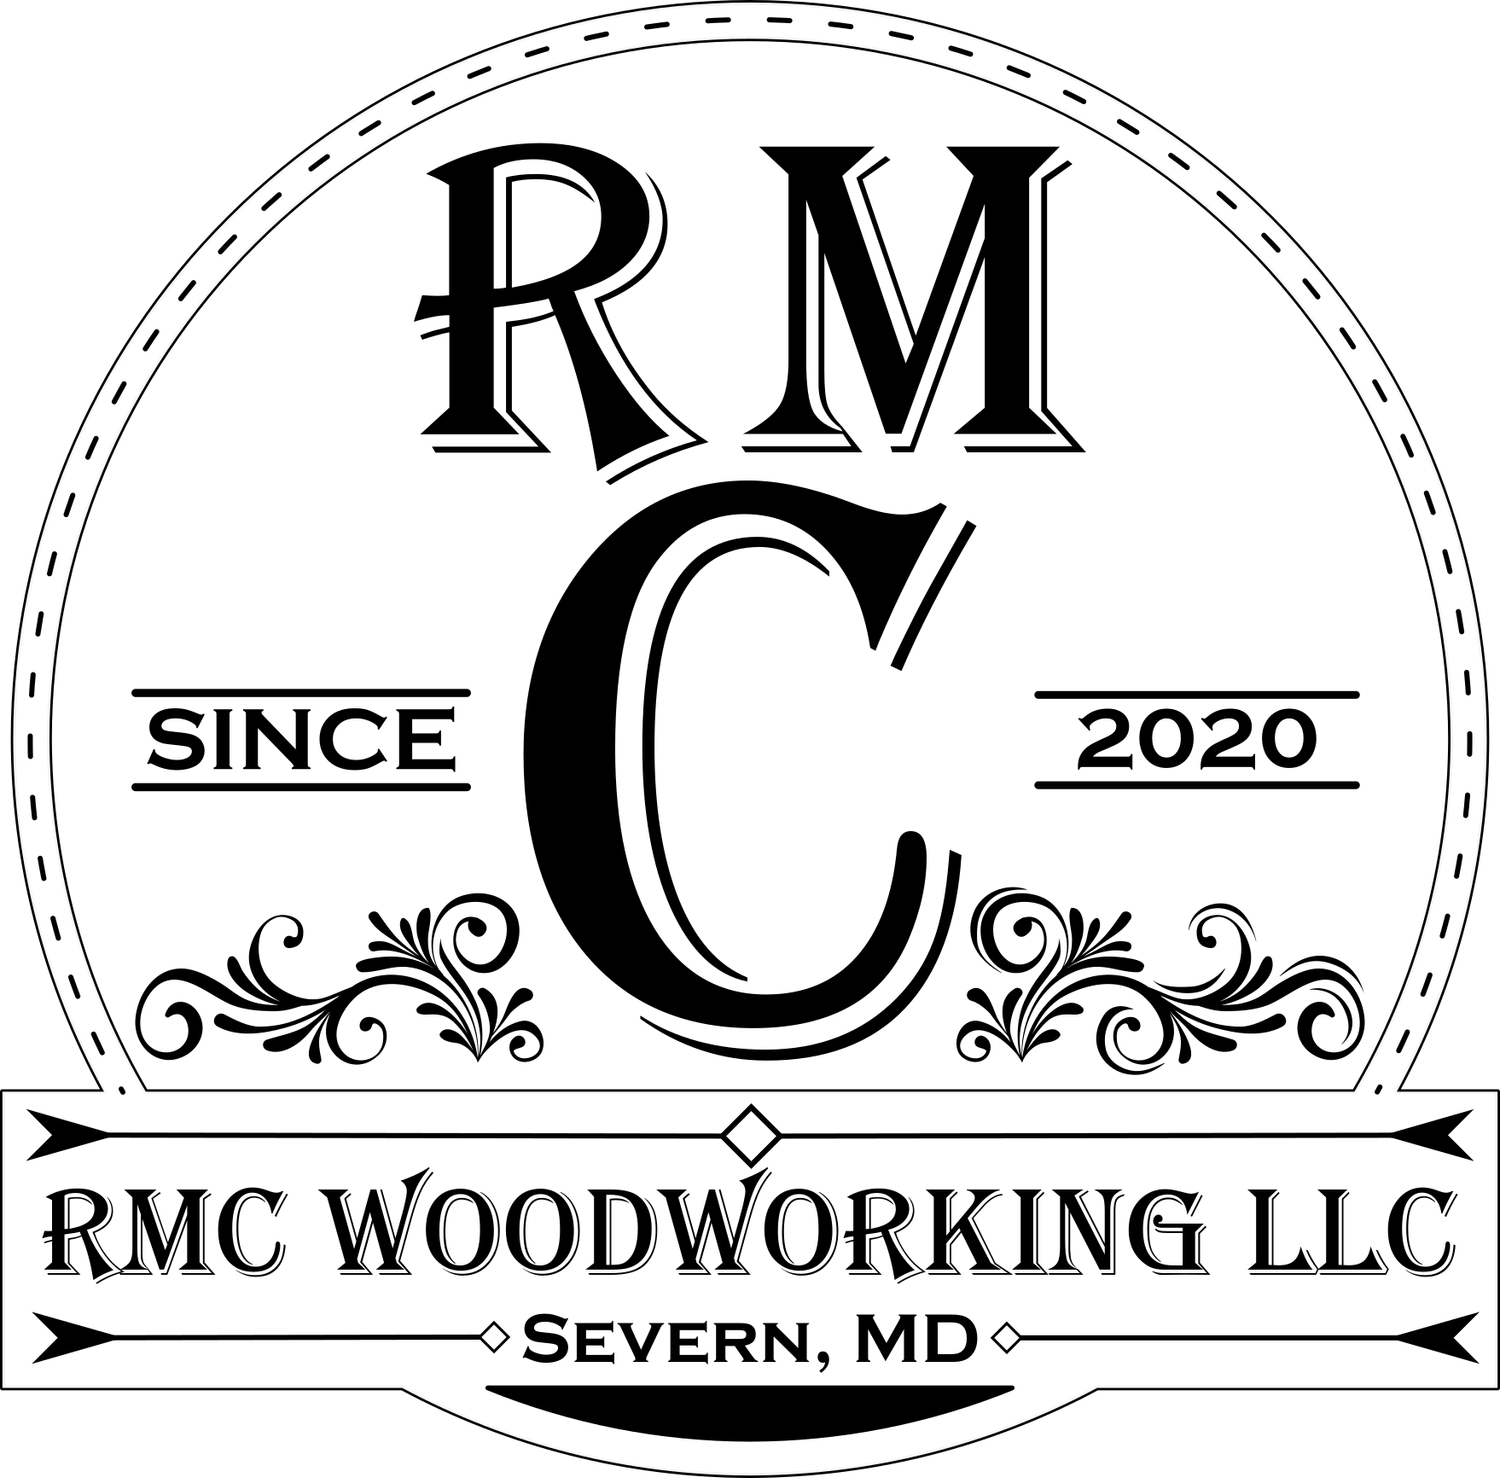 RMC Woodworking